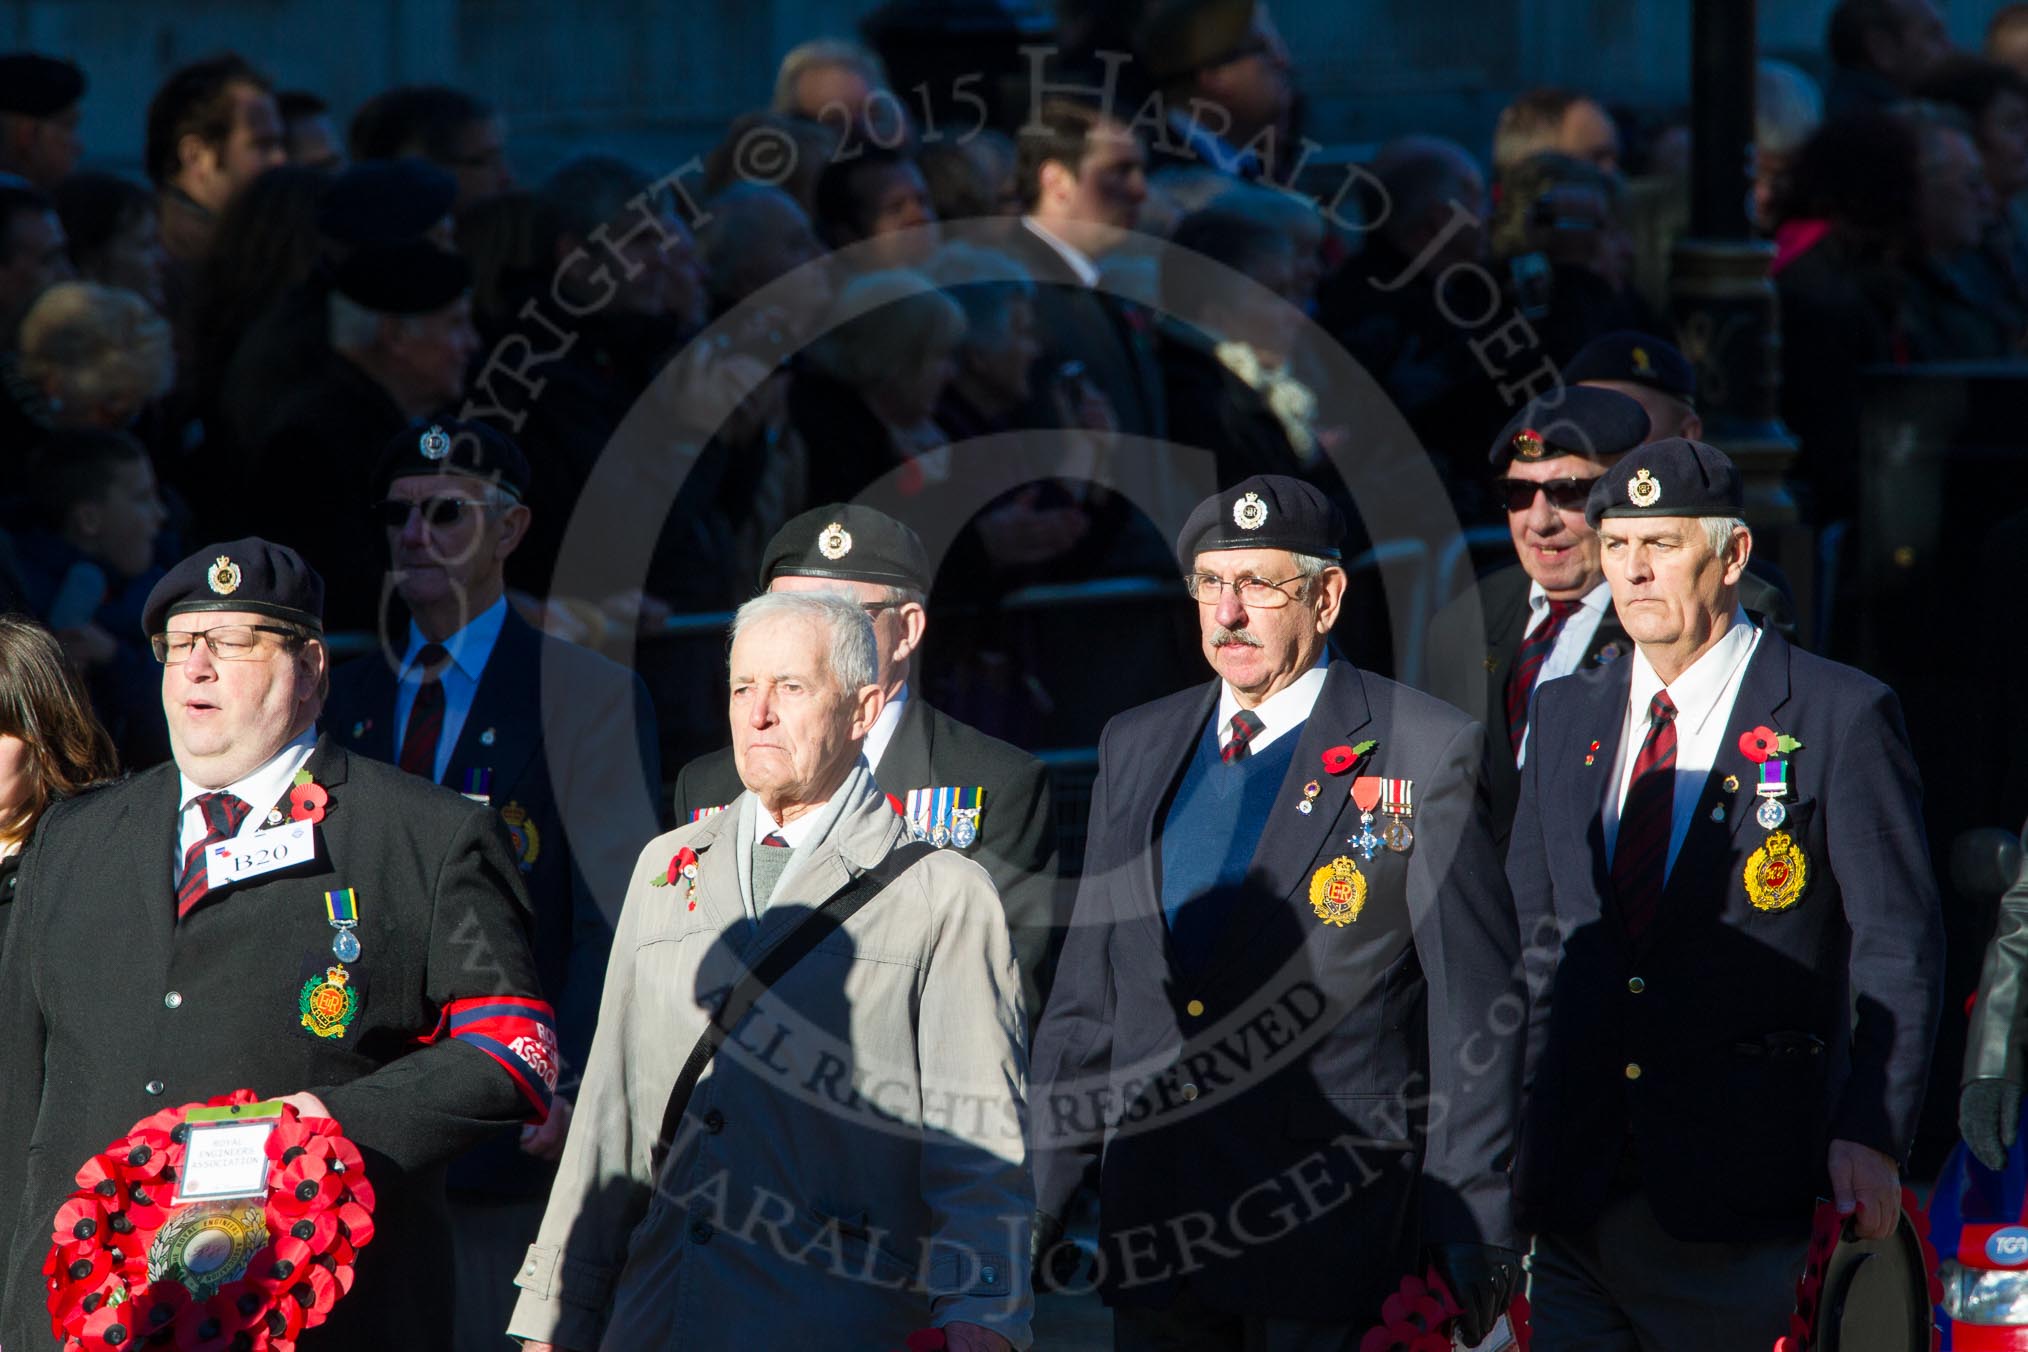 Remembrance Sunday Cenotaph March Past 2013: B20 - Royal Engineers Association..
Press stand opposite the Foreign Office building, Whitehall, London SW1,
London,
Greater London,
United Kingdom,
on 10 November 2013 at 12:01, image #1459